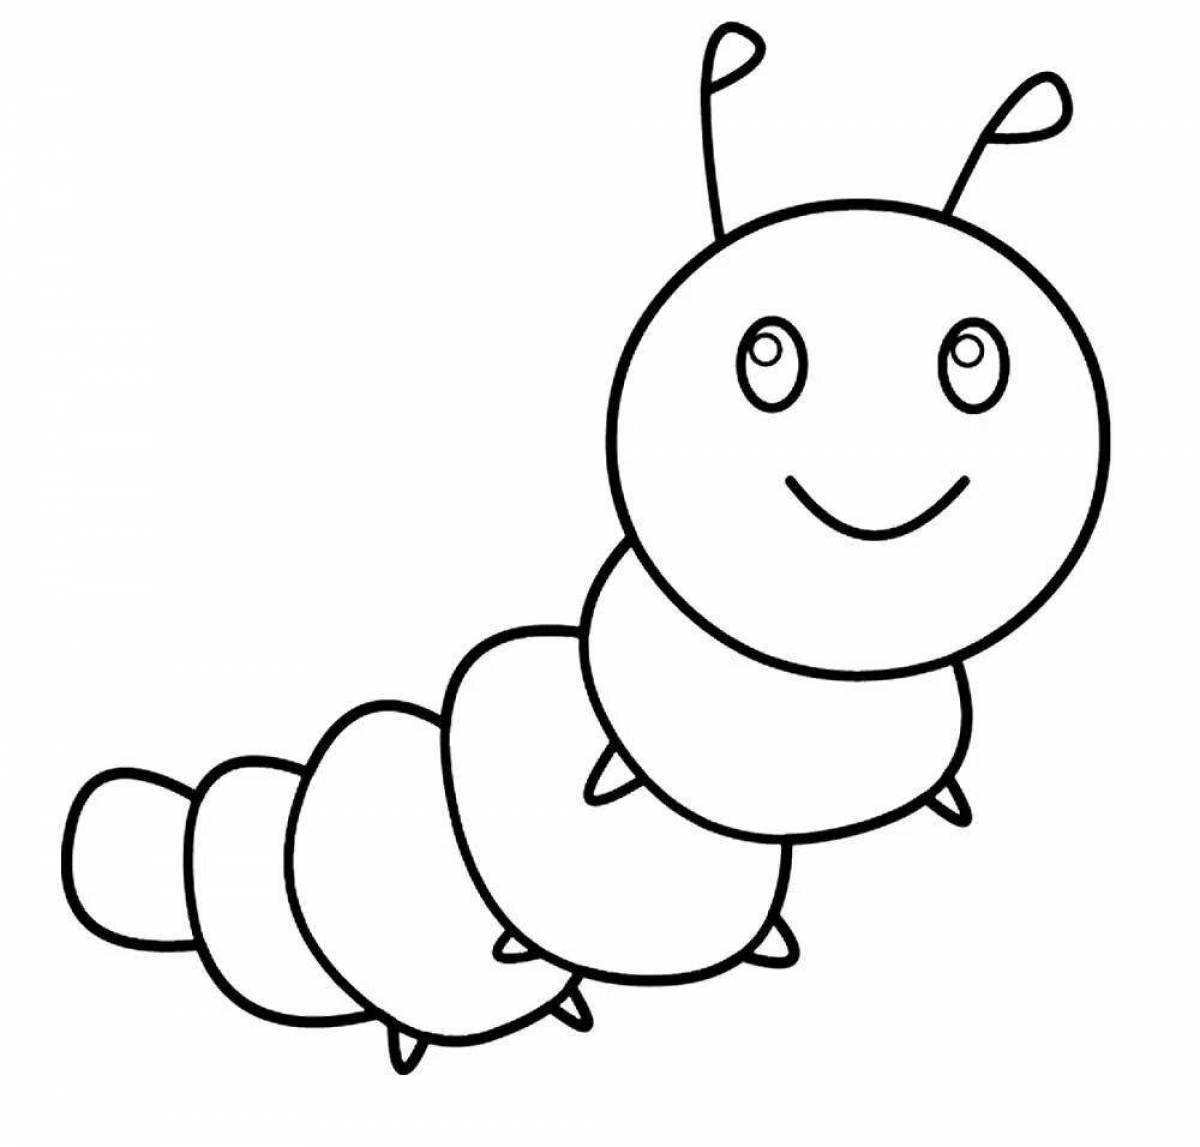 Amazing coloring caterpillar for kids